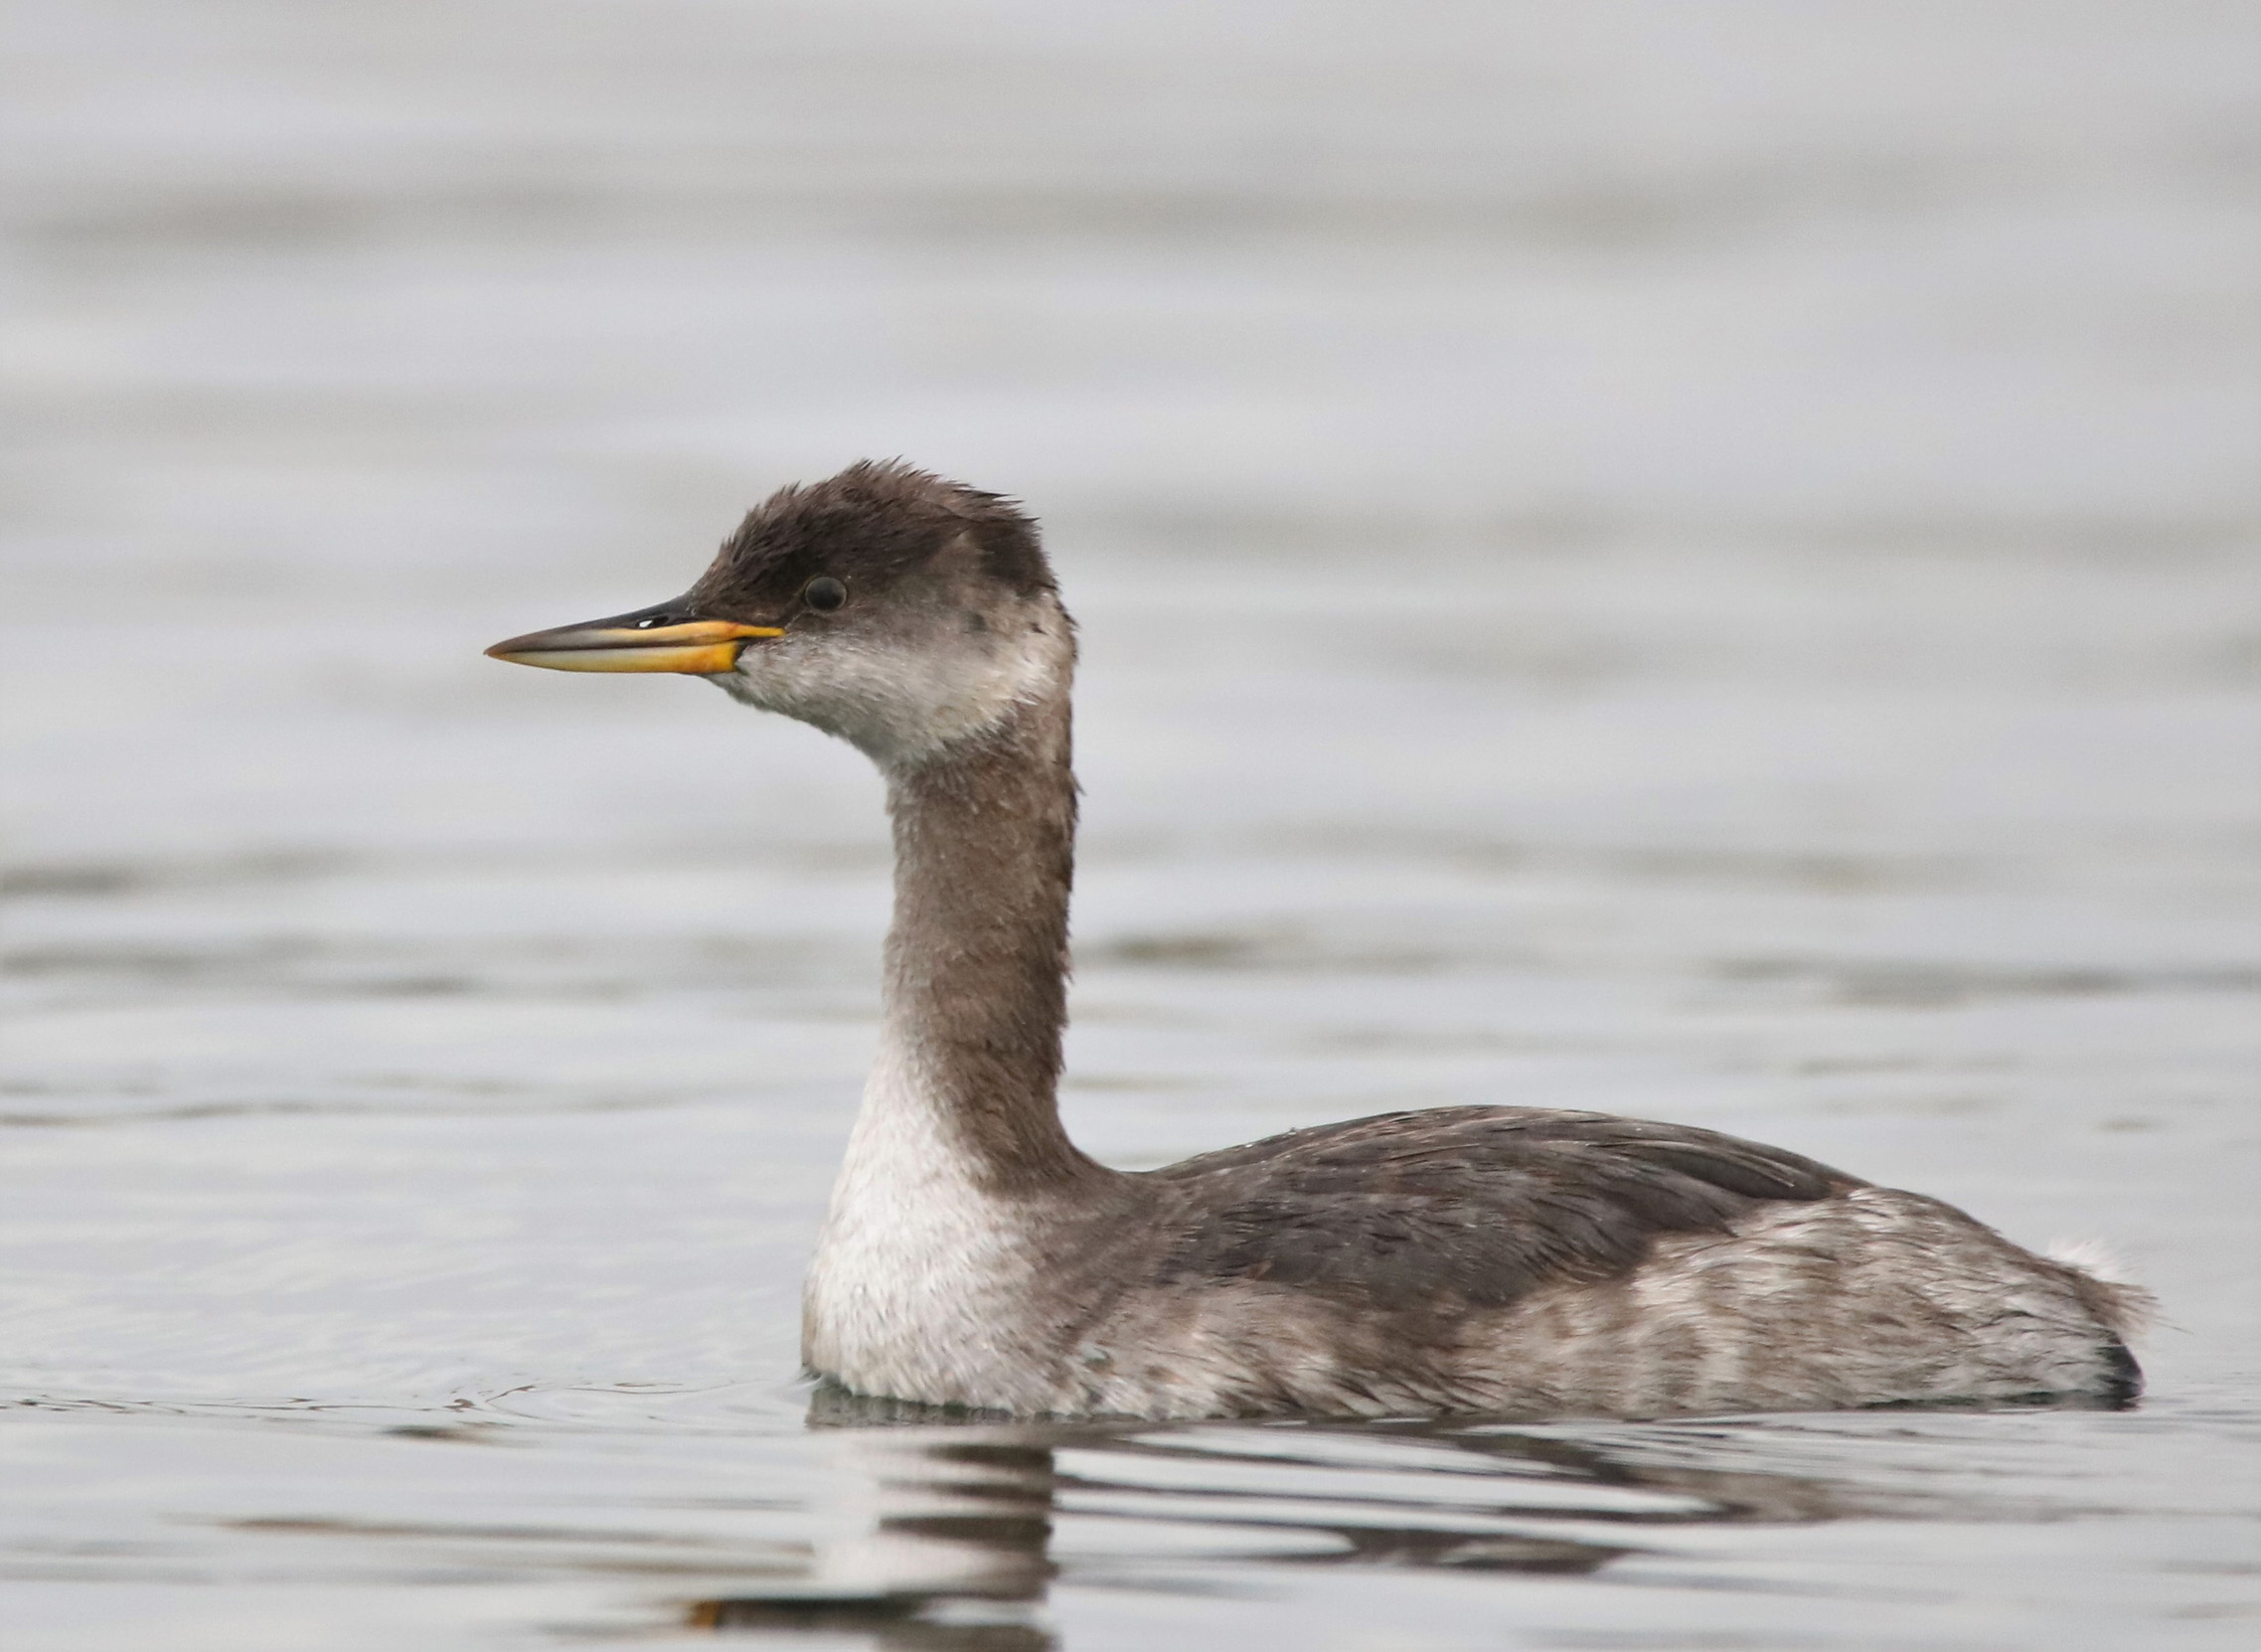 Red Necked Grebe in winter plumage swimming on water.